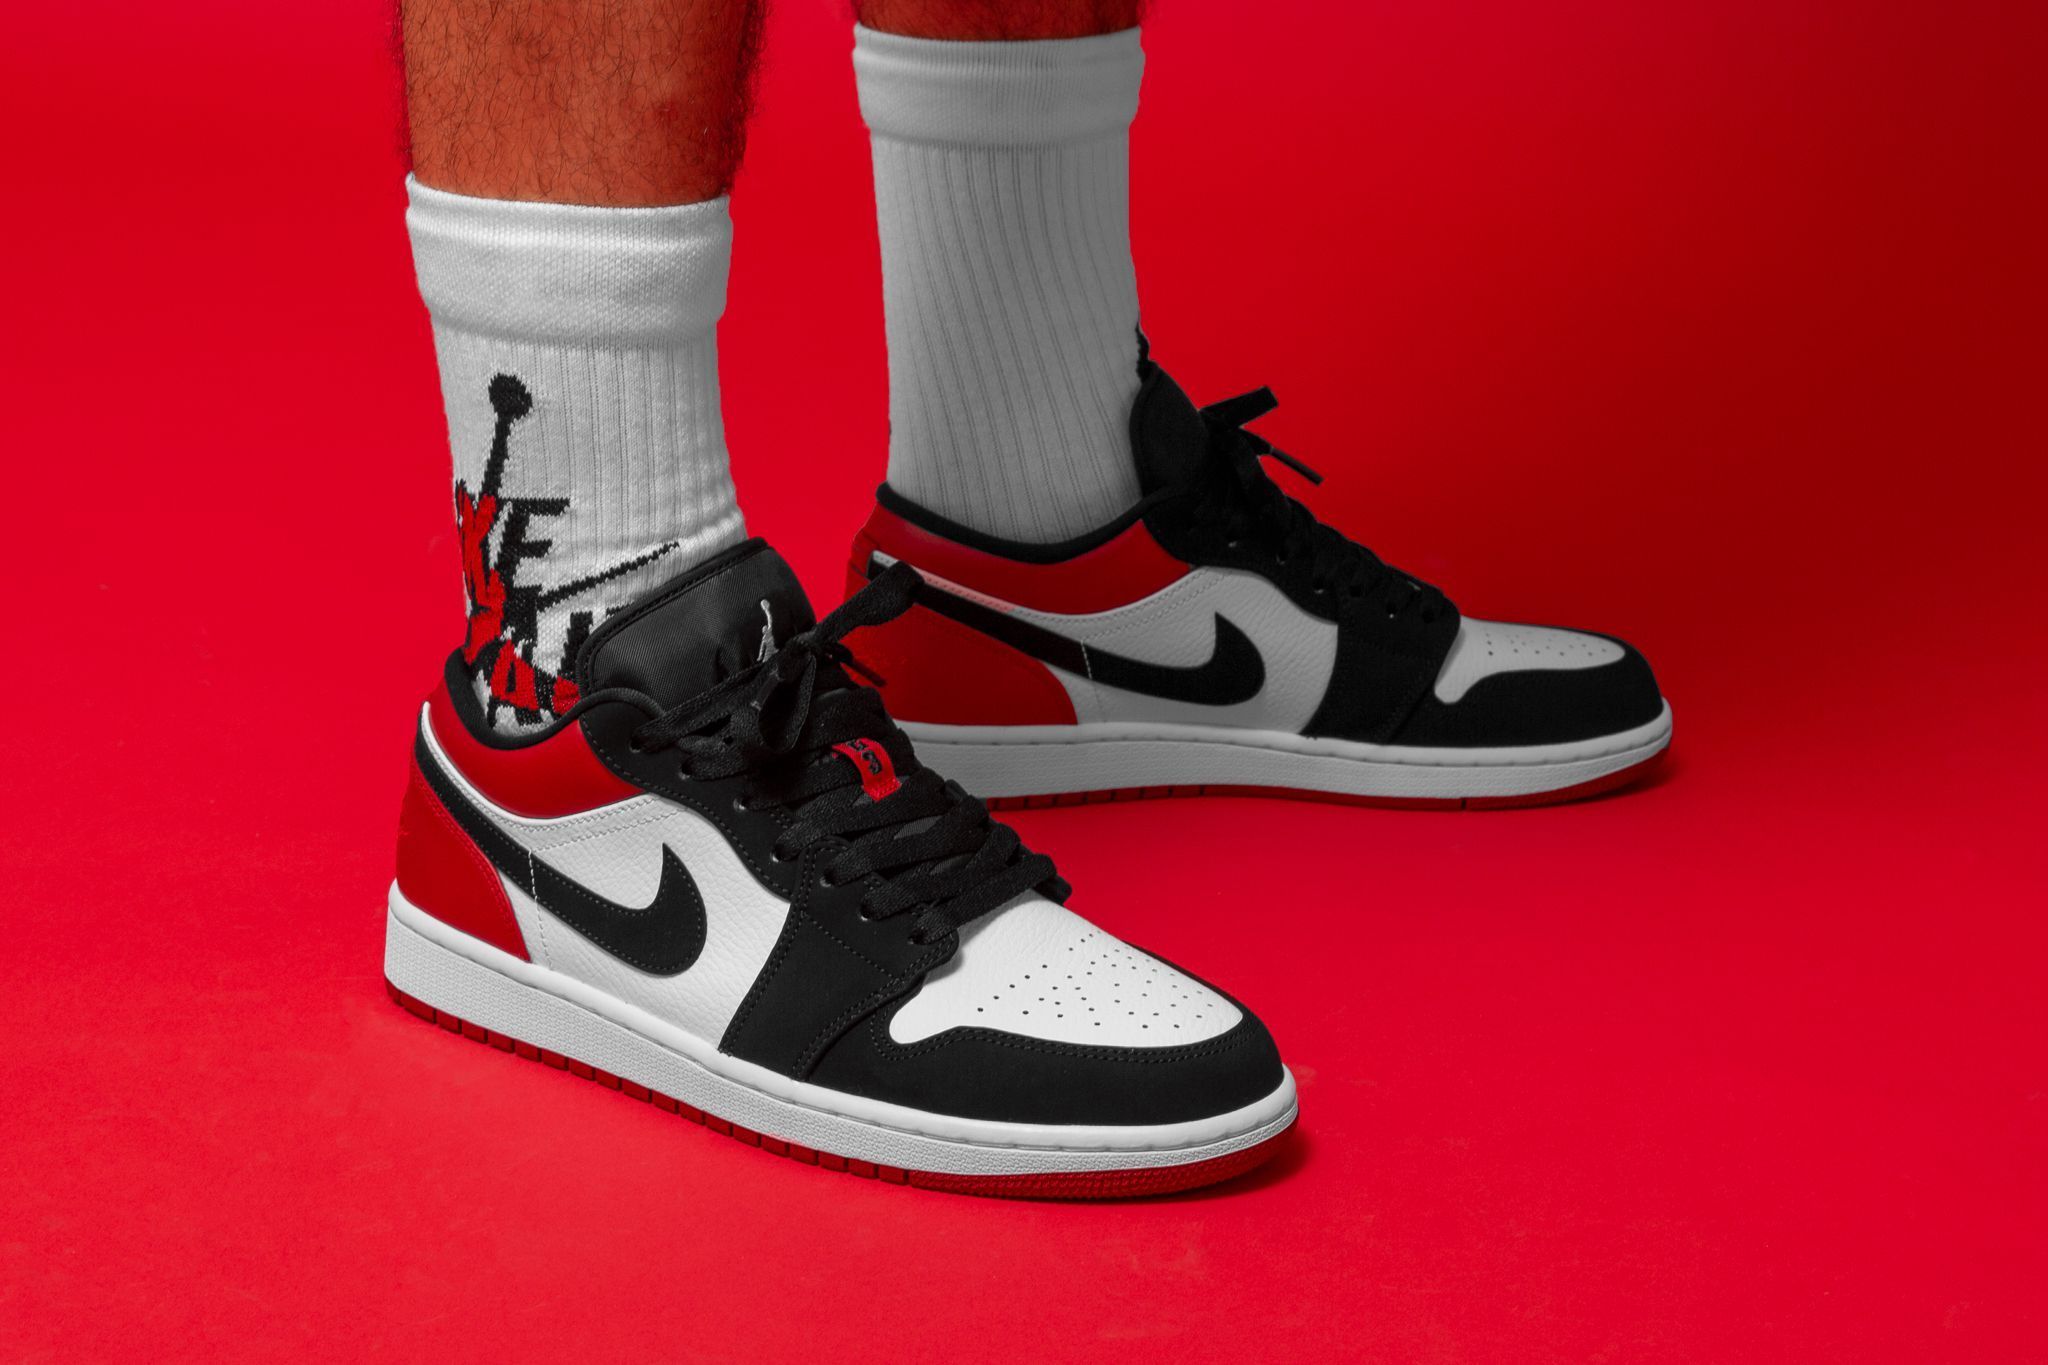 Titolo on X: "Out 🔥 Now Get the Air Jordan 1 Low 🔴 Black Toe ⚫️ H e r e  ➡️ https://t.co/jZyH2z4Kf2 US 7 (40) - US 13 (47.5)⁠ style code 🔎